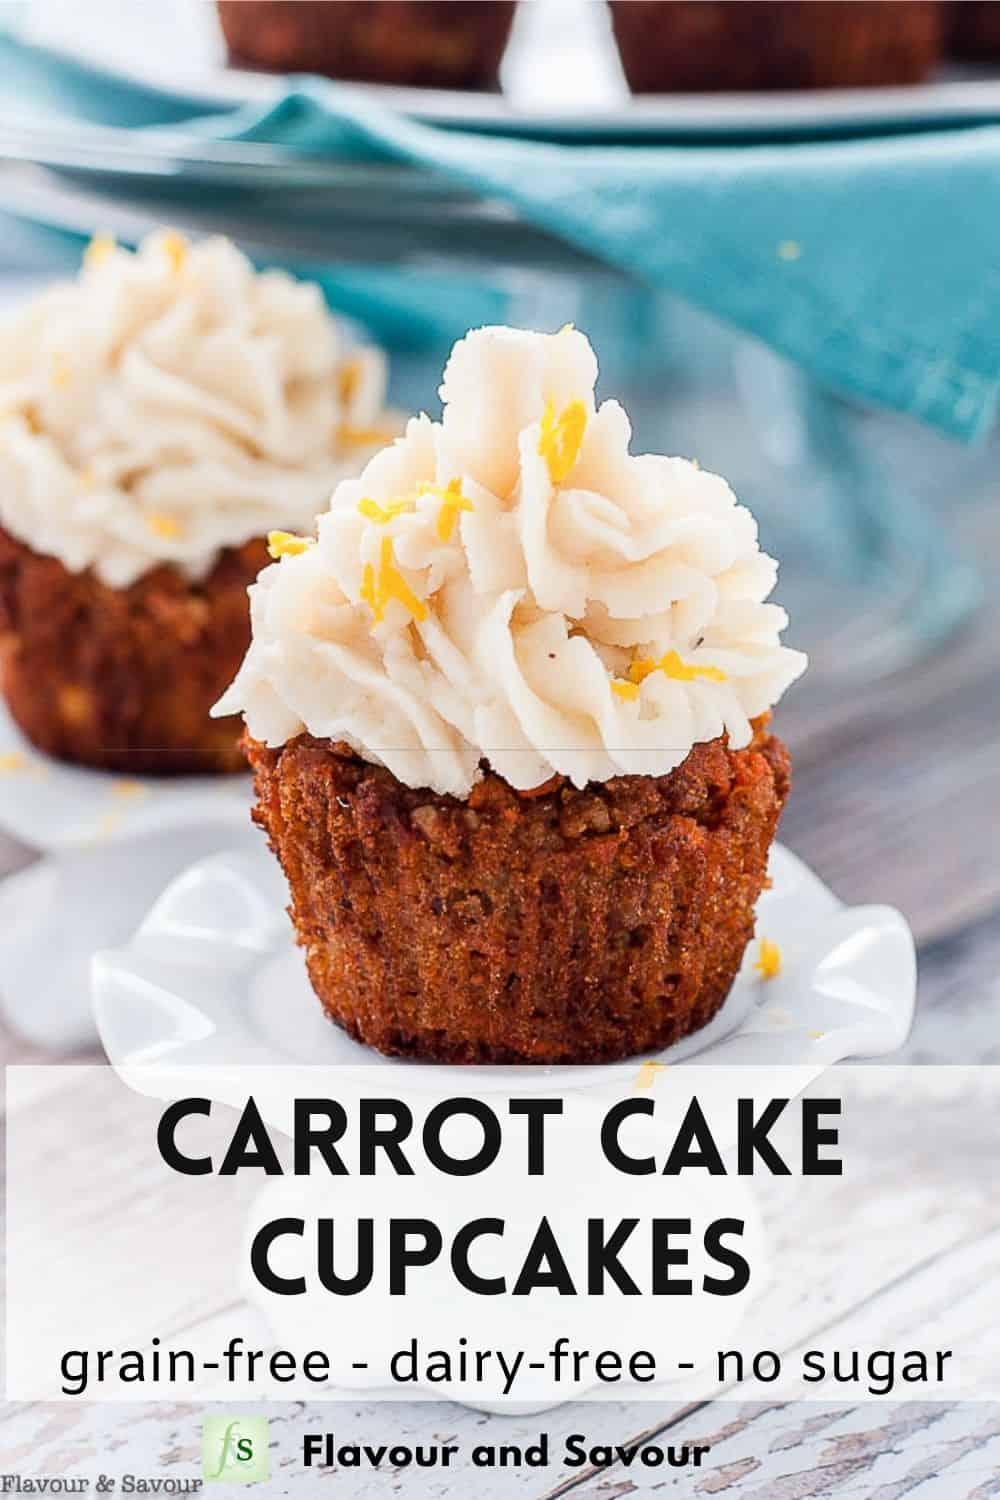 Paleo Carrot Cake Cupcakes with Coconut Butter Frosting